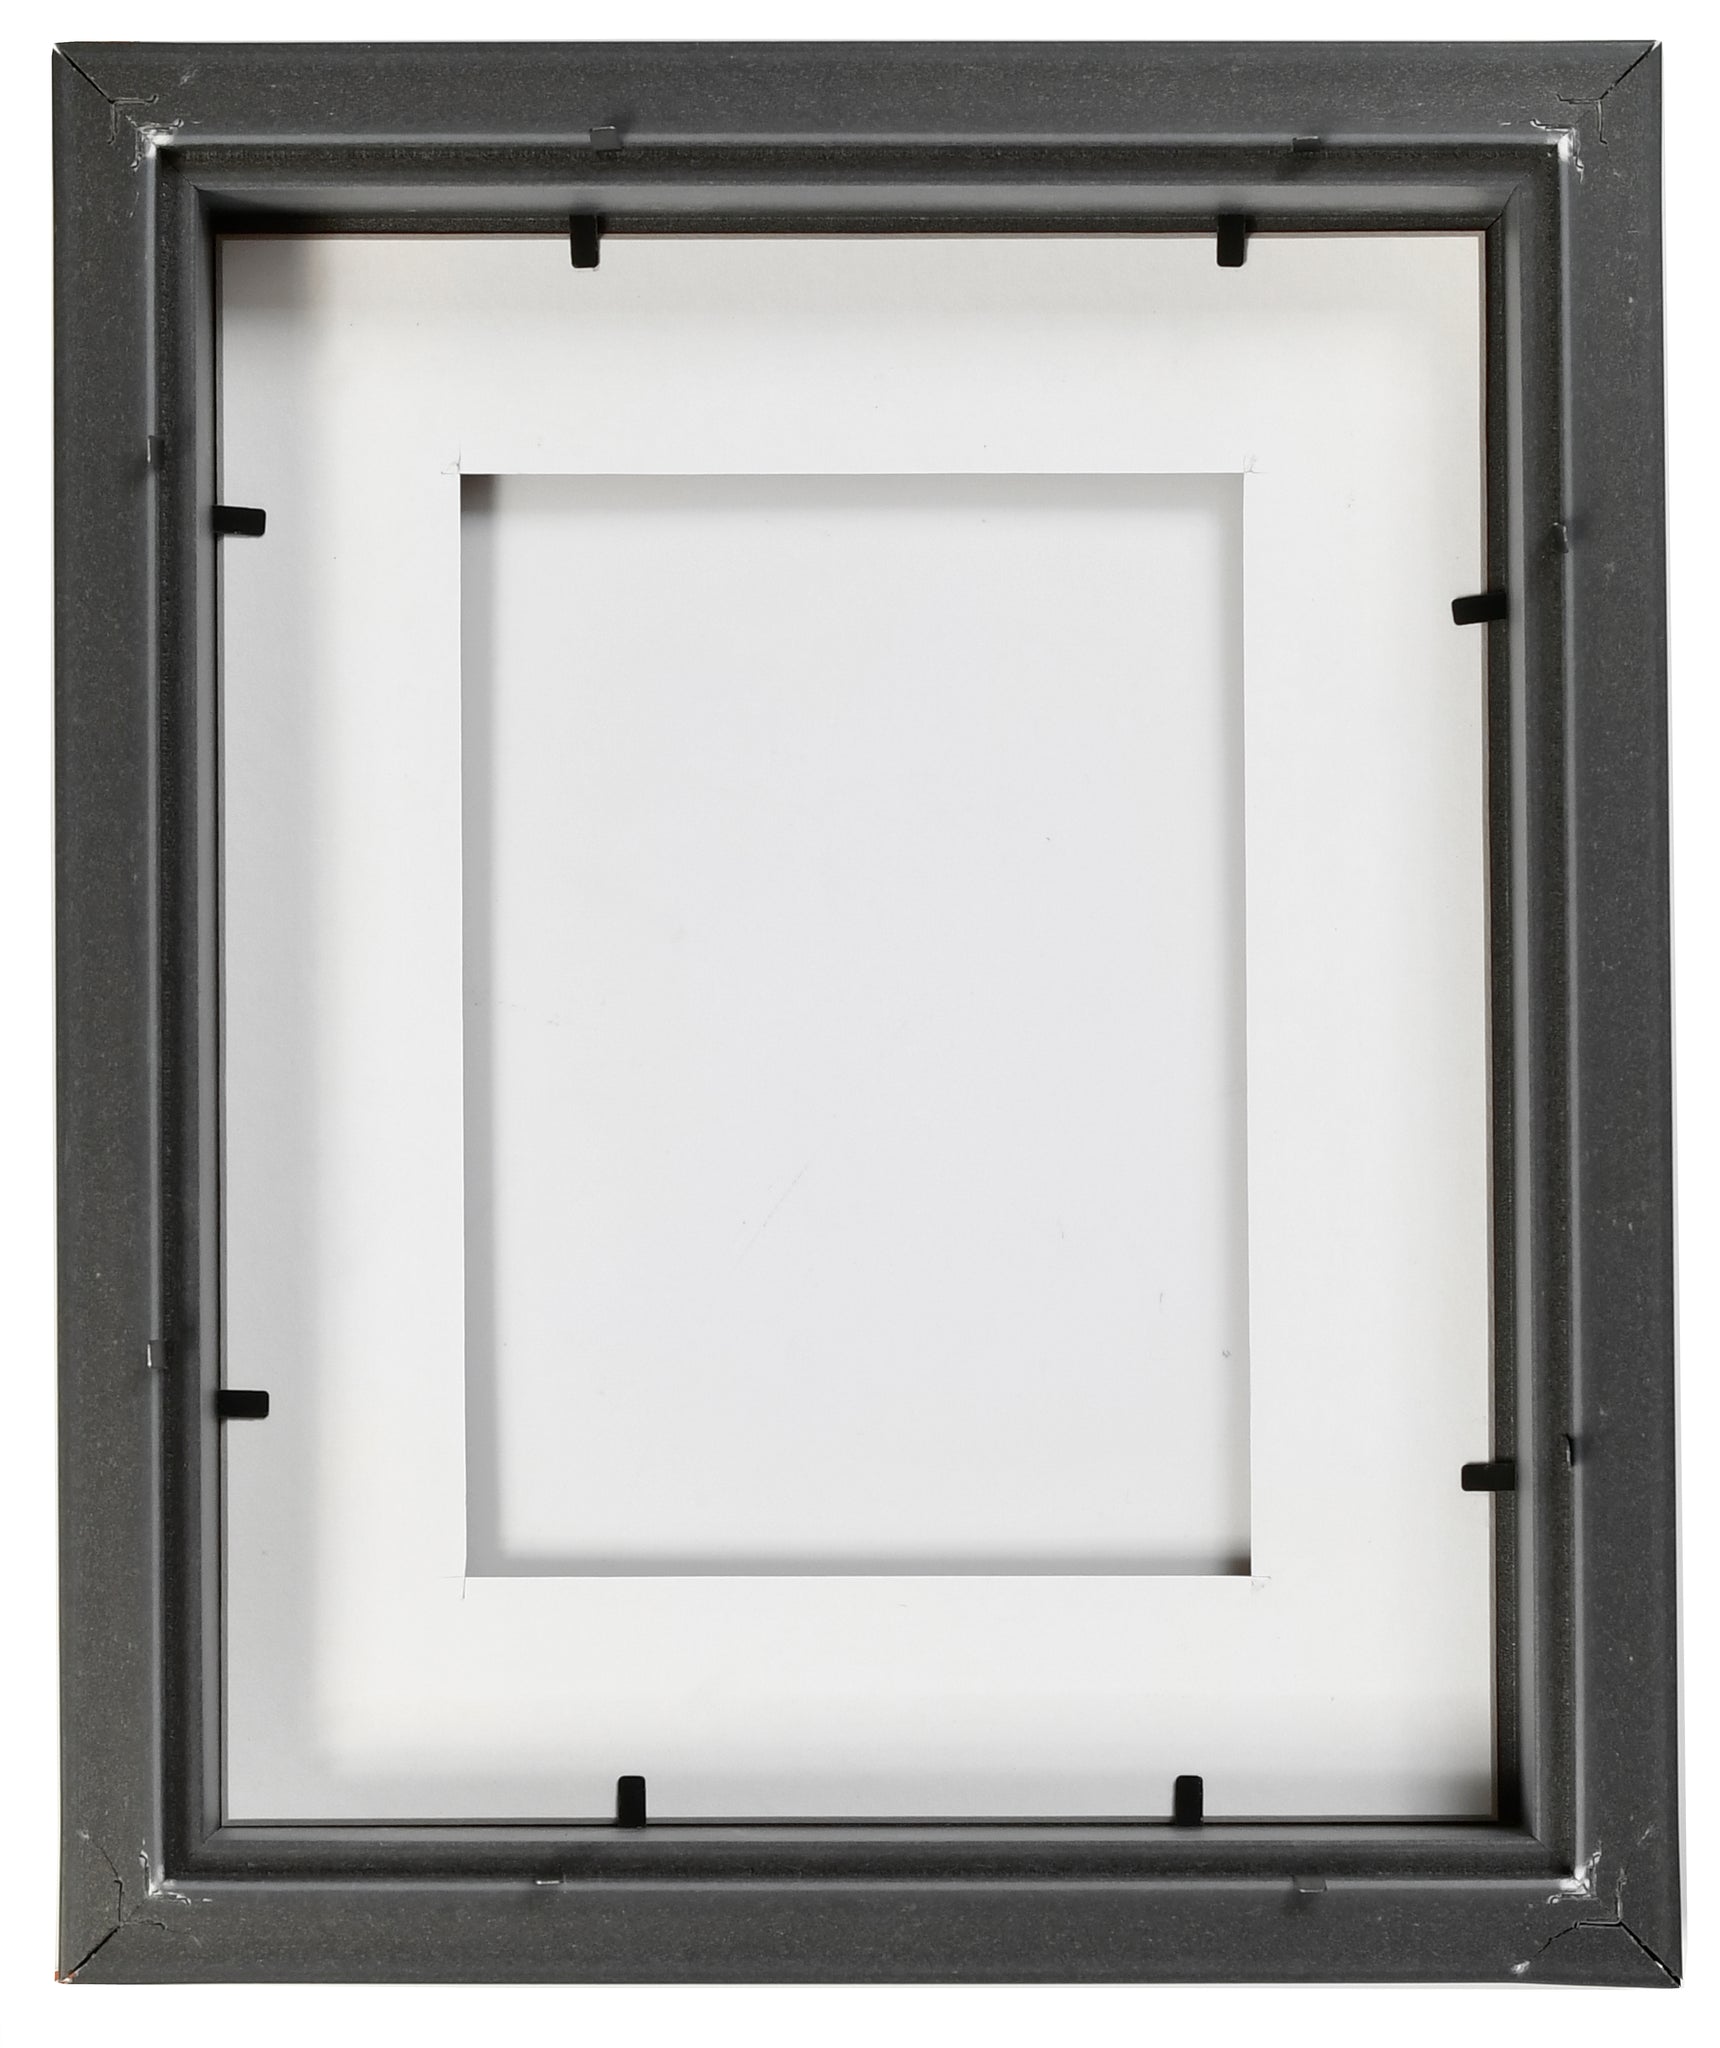 SHADOW BOX FRAME FOR OBJECTS - BLACK FRAME - GOLD MAT - CLEAR GLASS - 1" DEPTH